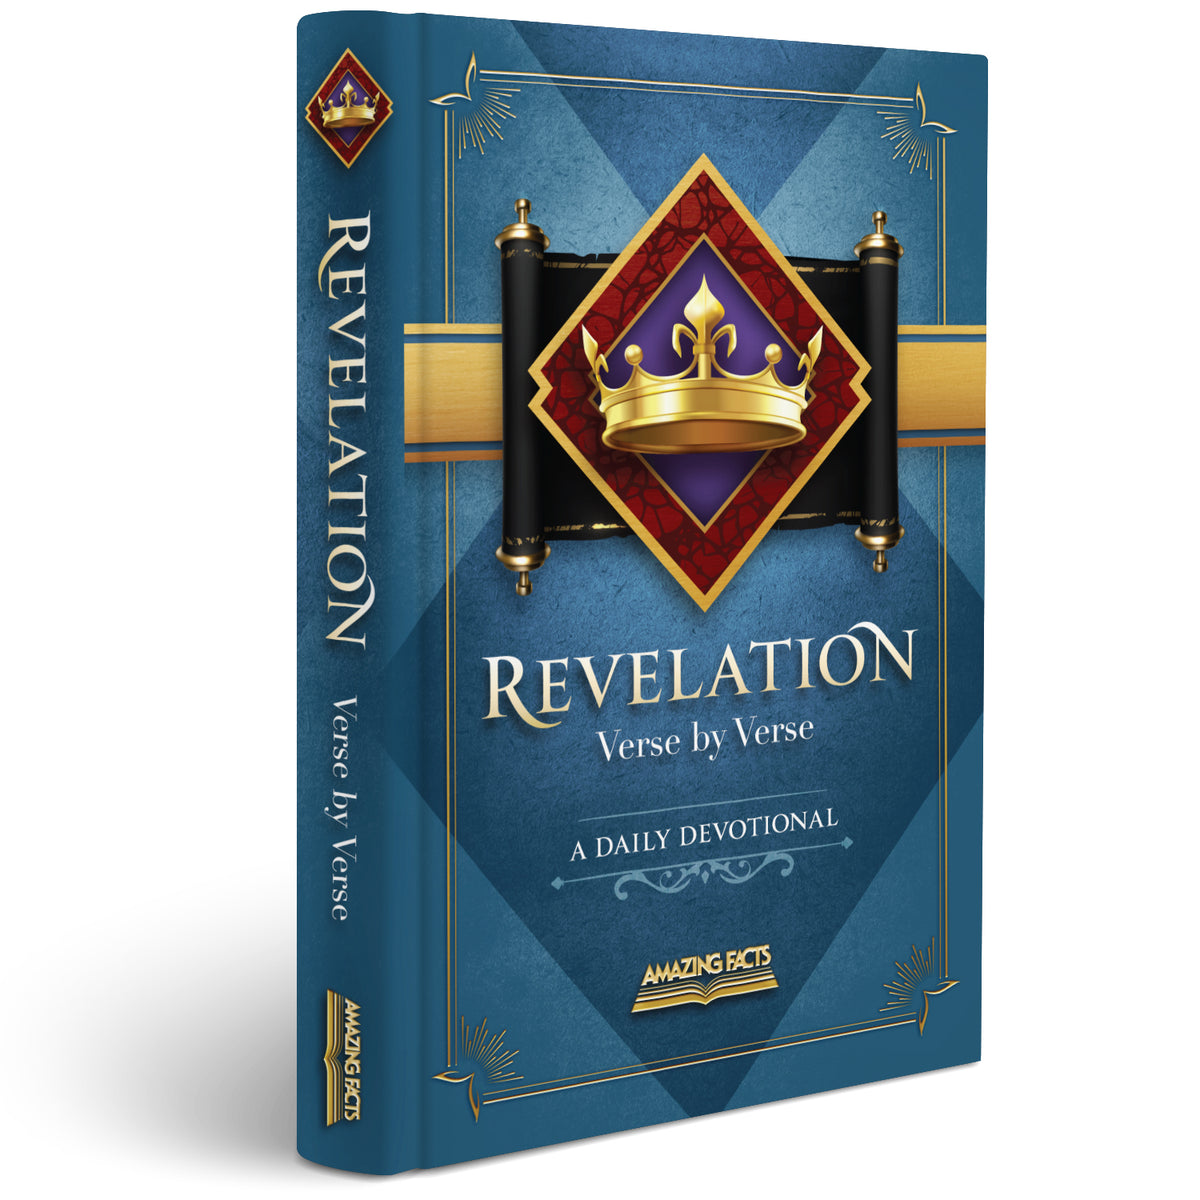 Revelation Verse by Verse: A Daily Devotional (Hardcover)